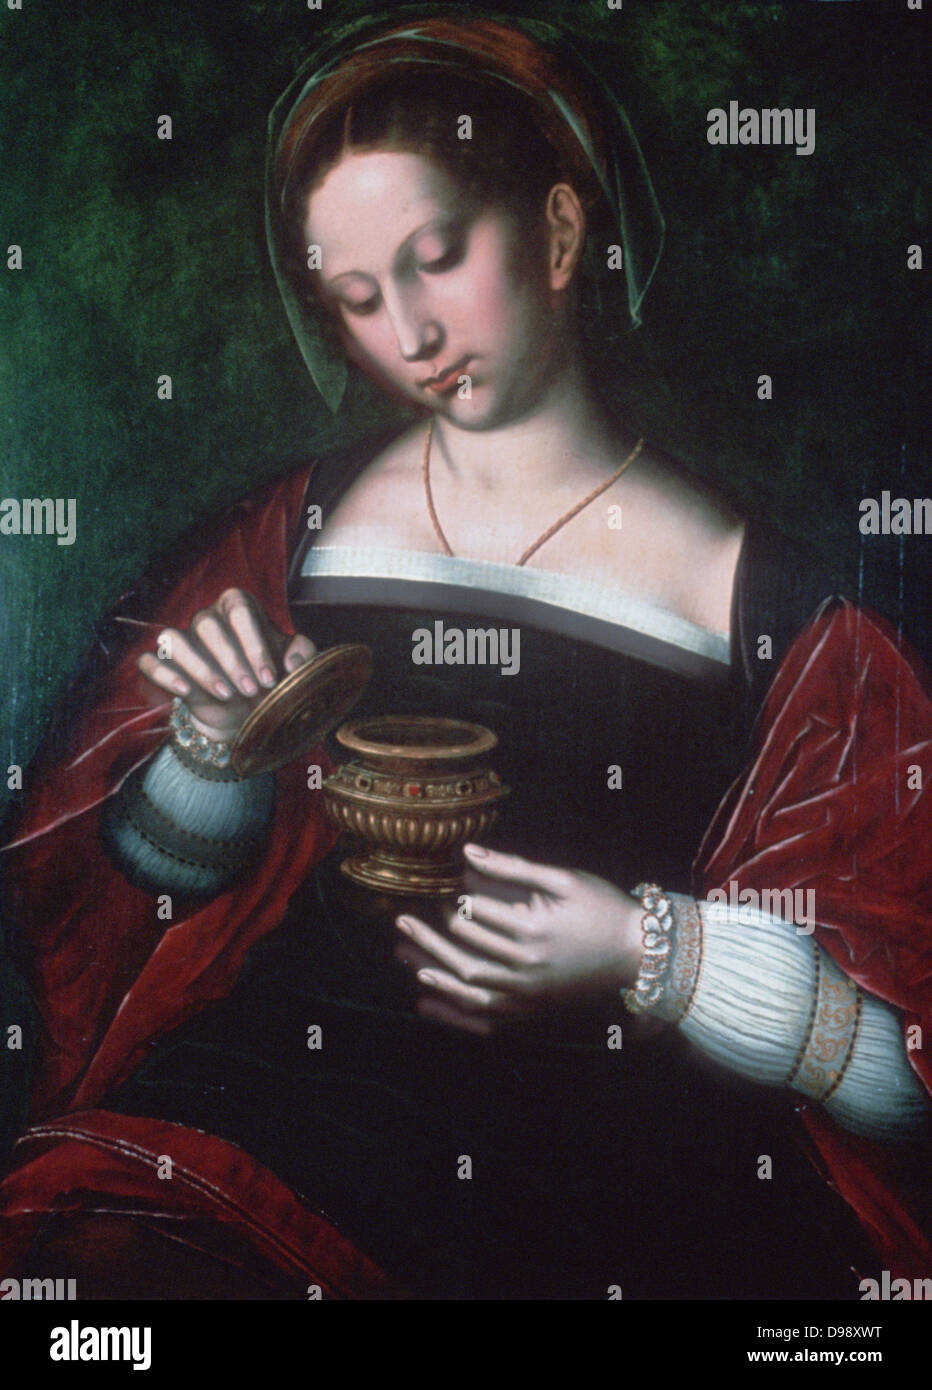 Mary Magdalene'. Oil on oak panel. Saint Ambrosius Benson (c1495-1550) Flemish Northern Renaissance painter. Devoted follower of Jesus, here with pot of ointment which she poured over his head: Mark 13.3-9. Christian Saint Stock Photo